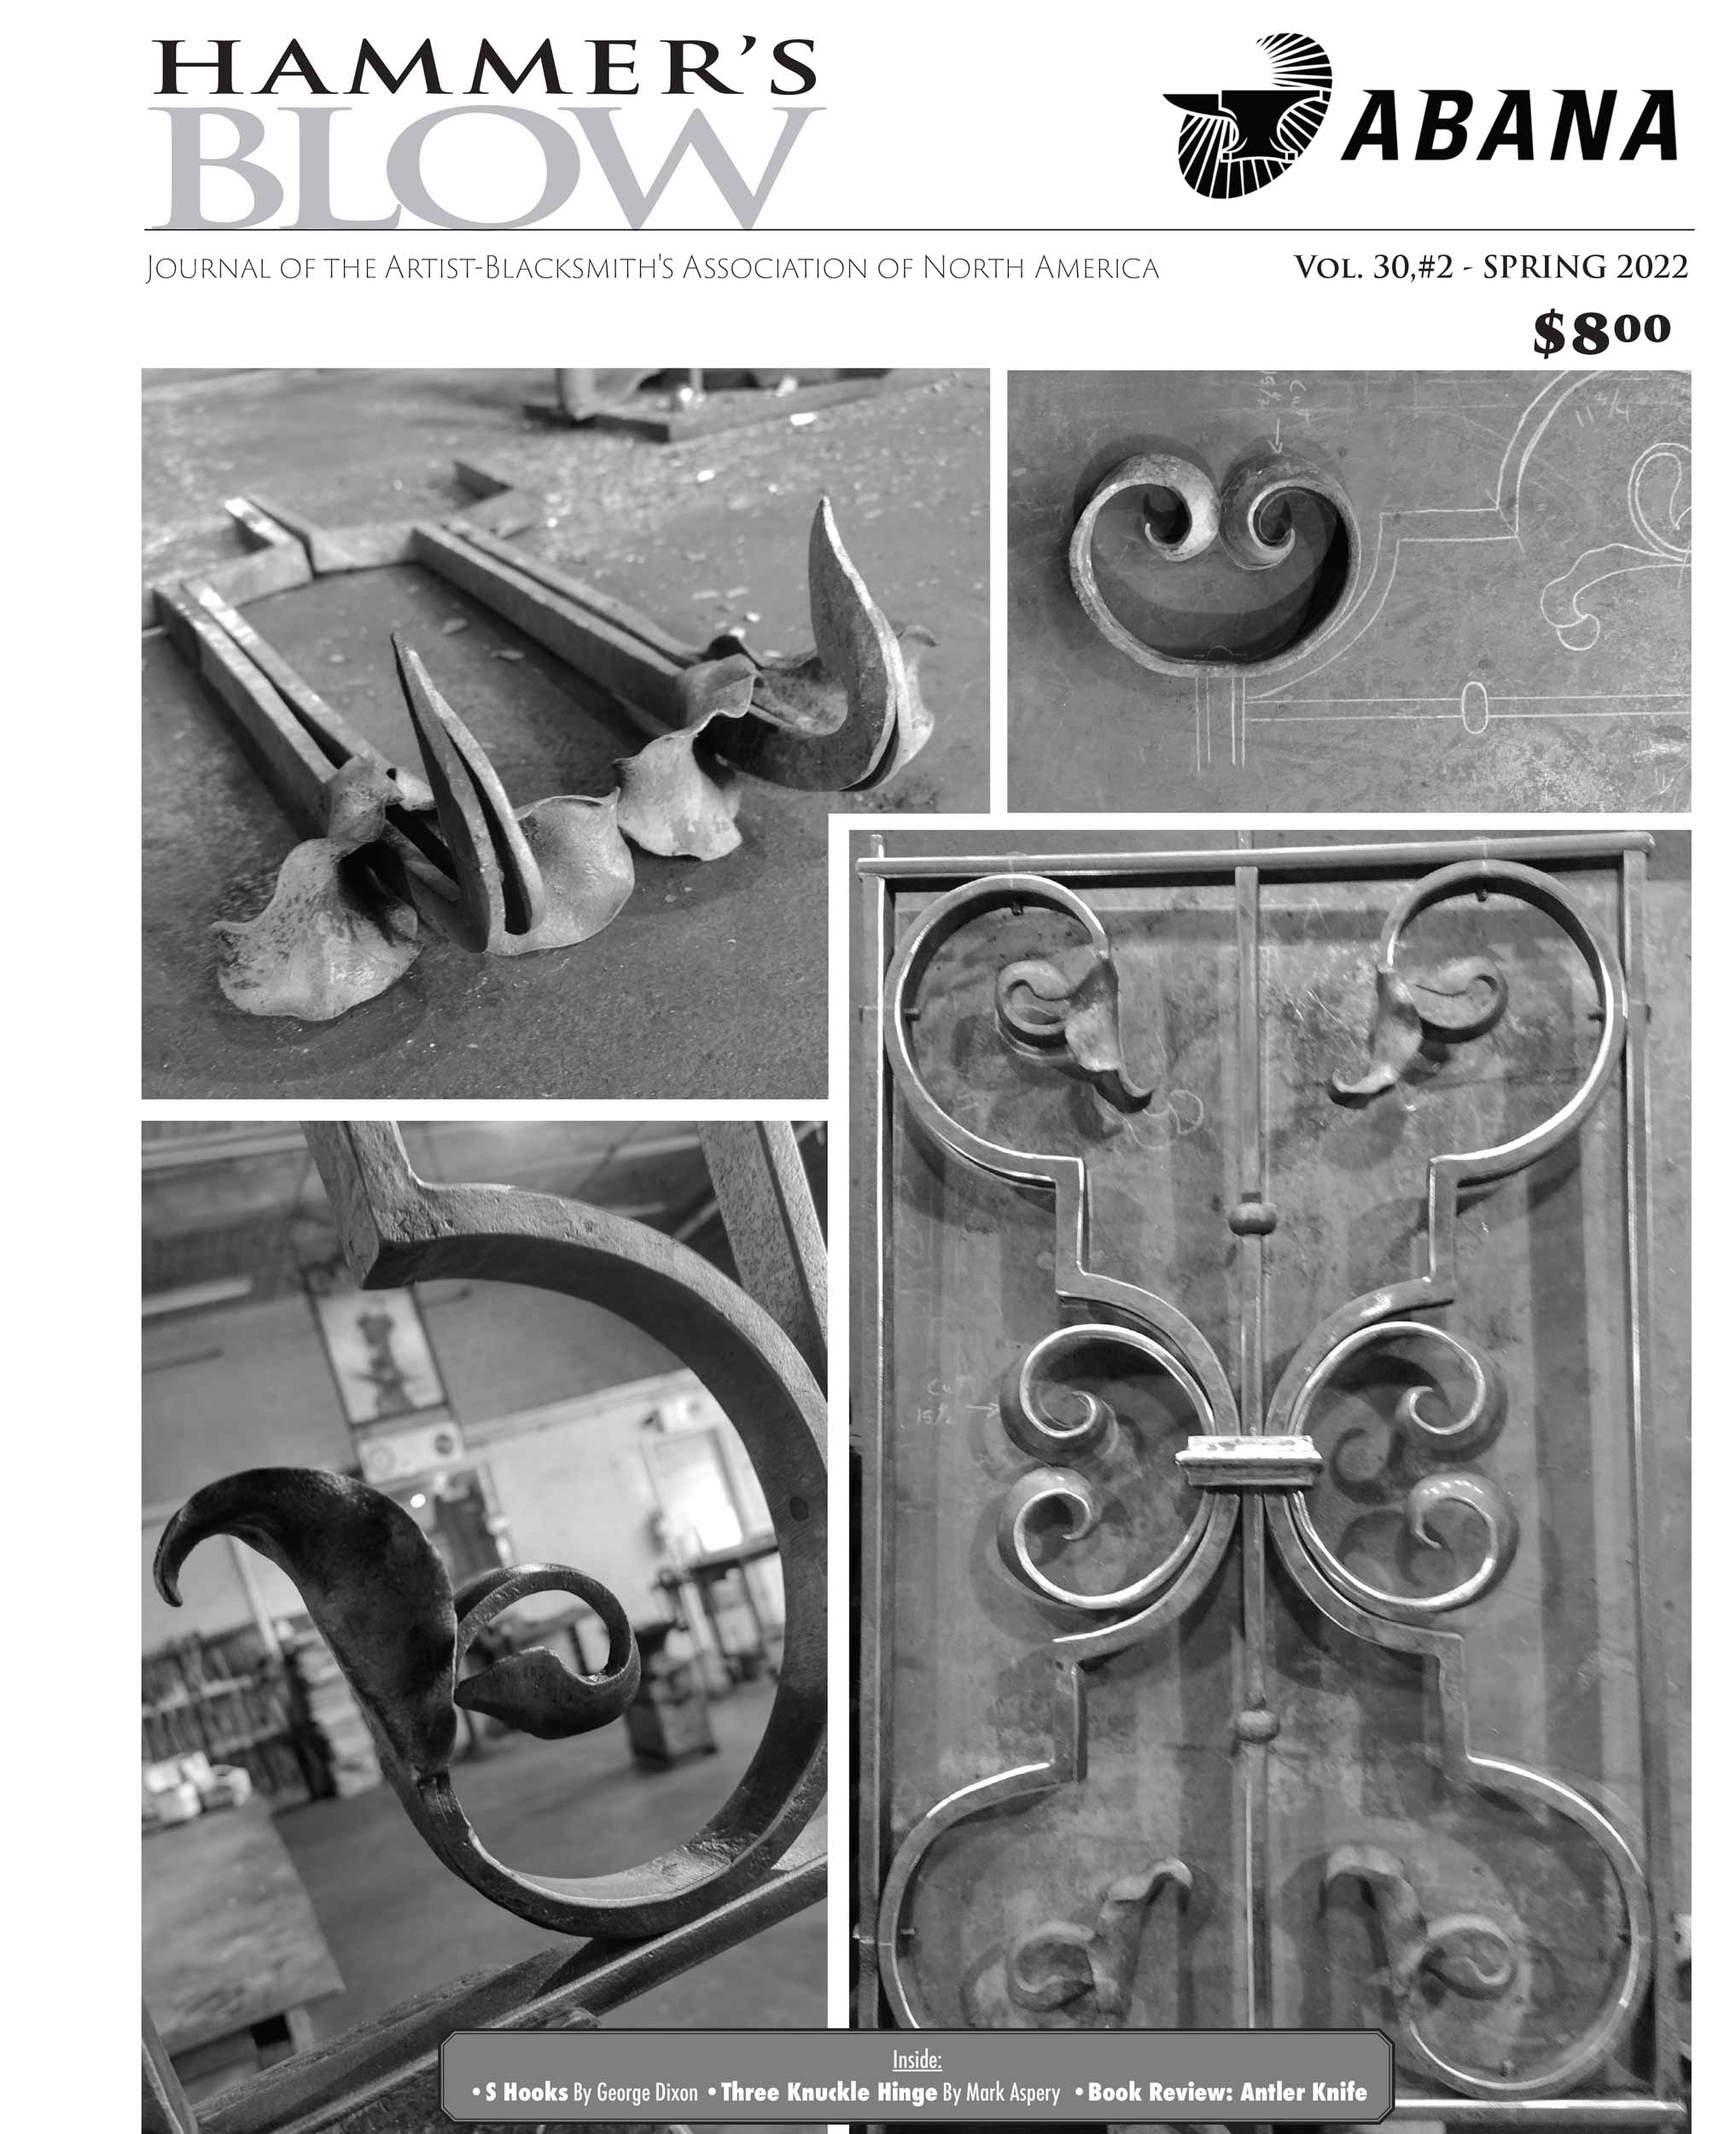 Cover image of the Spring 2022 issue of Hammer's Blow, a how-to journal from the Artist-Blacksmith's Association of North America.